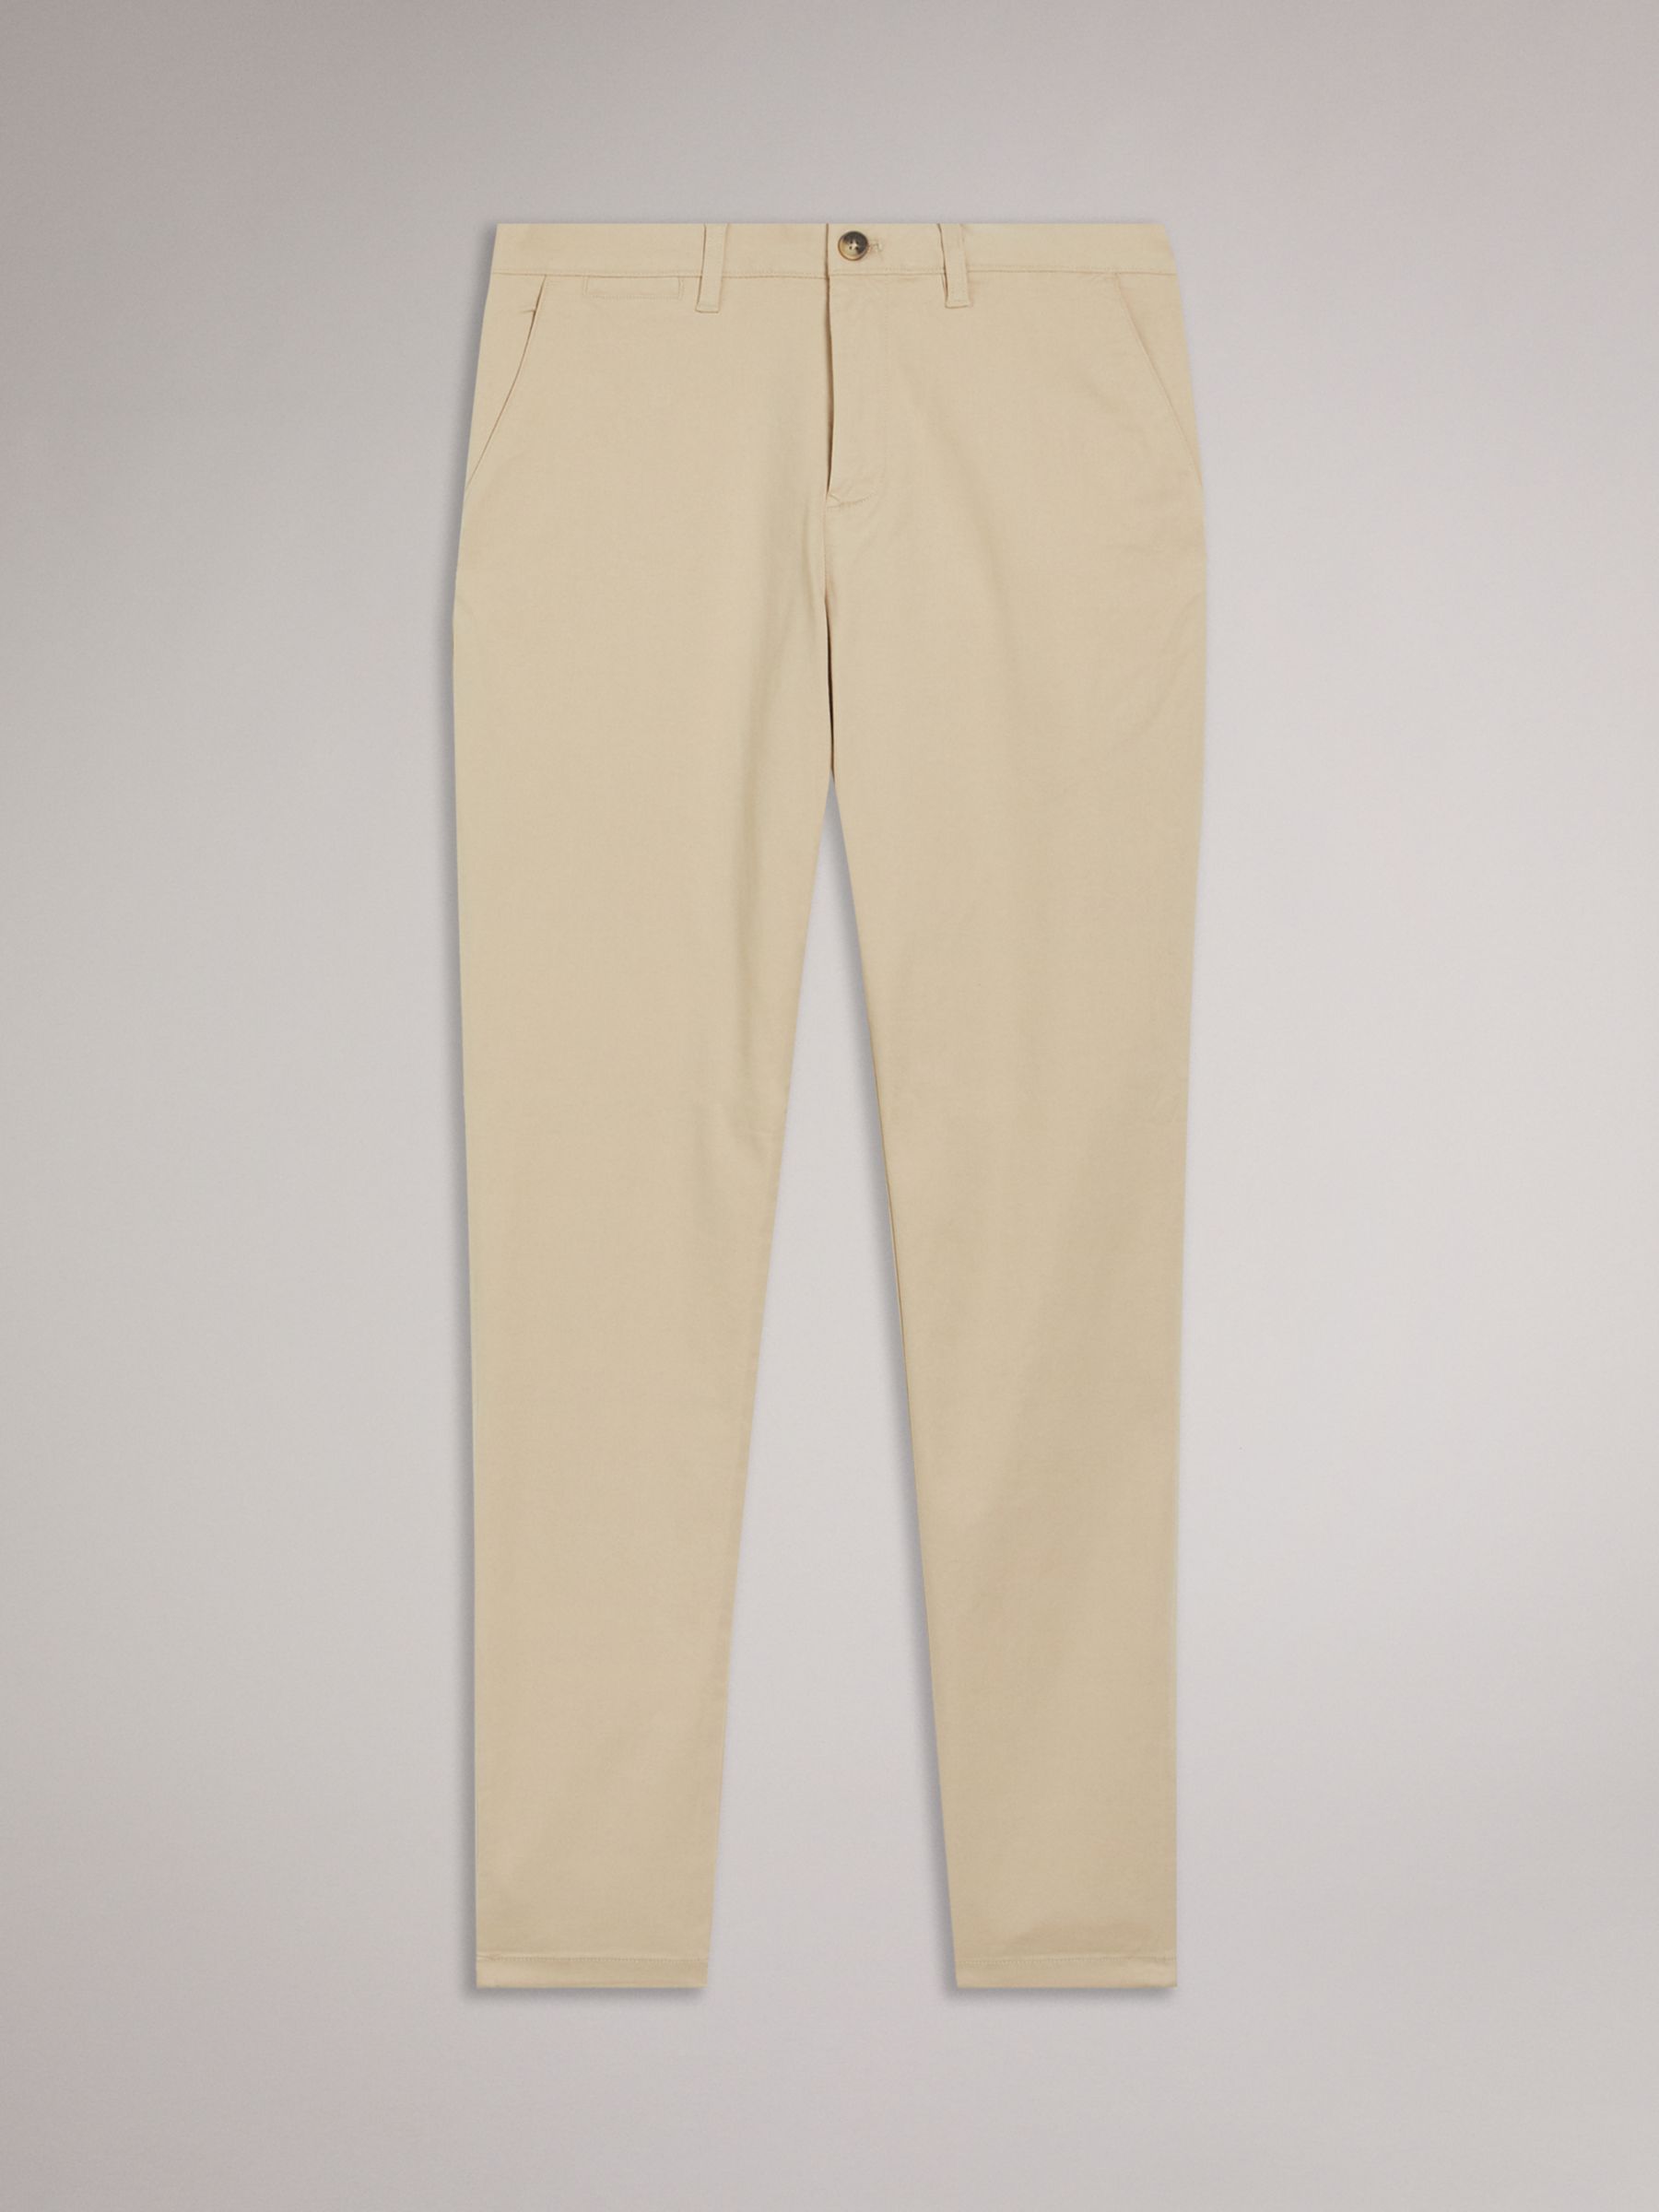 Buy Ted Baker Haybrn Regular Fit Textured Chino Trousers, Light Grey Online at johnlewis.com